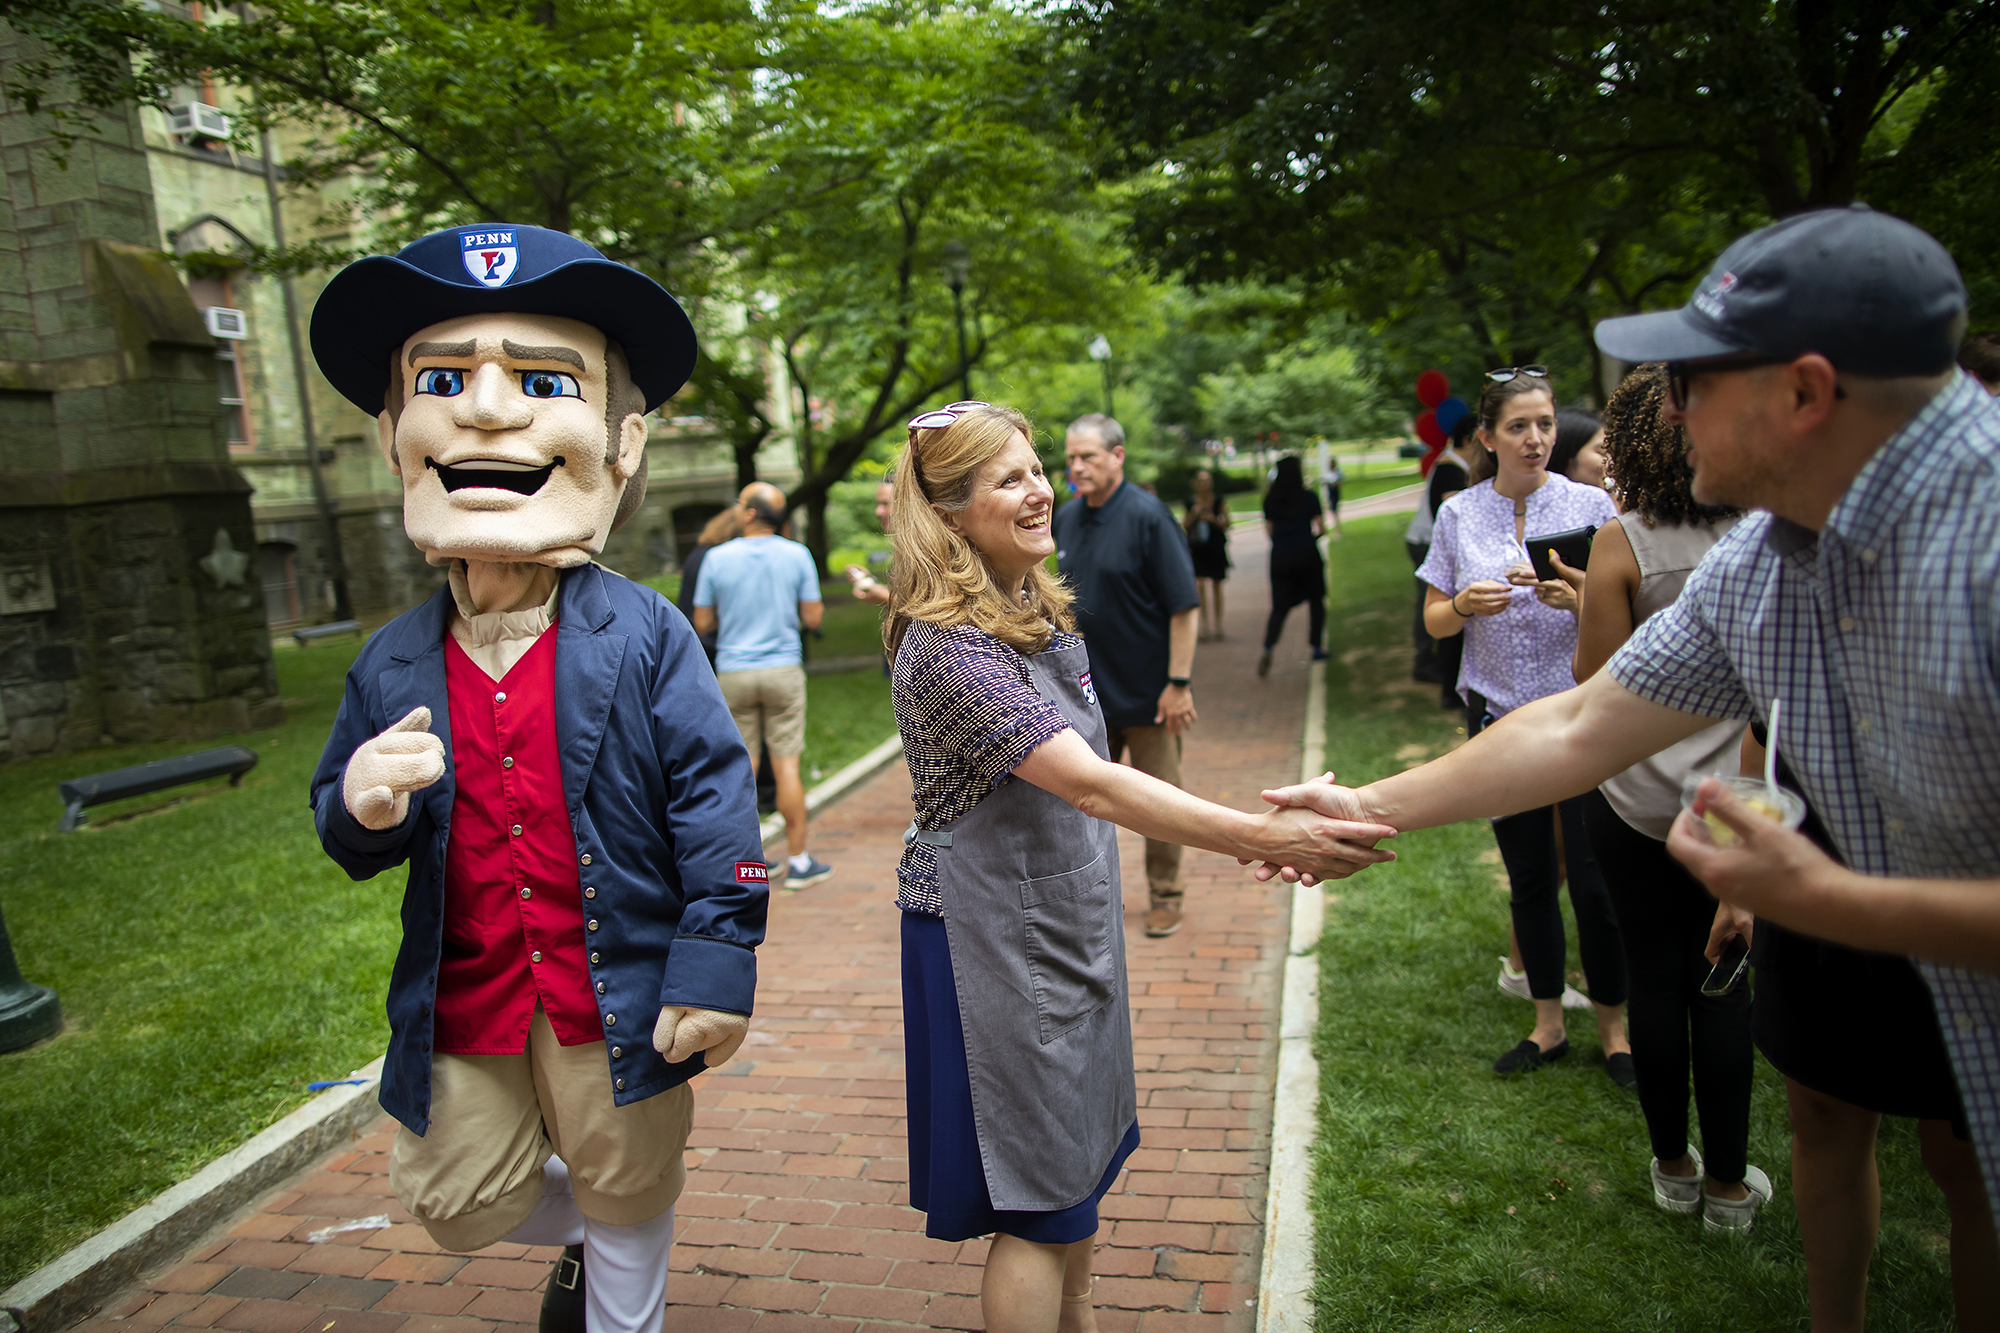 The Quaker mascot stands beside Penn President Liz Magill who shakes hands with someone in front of College Hall.